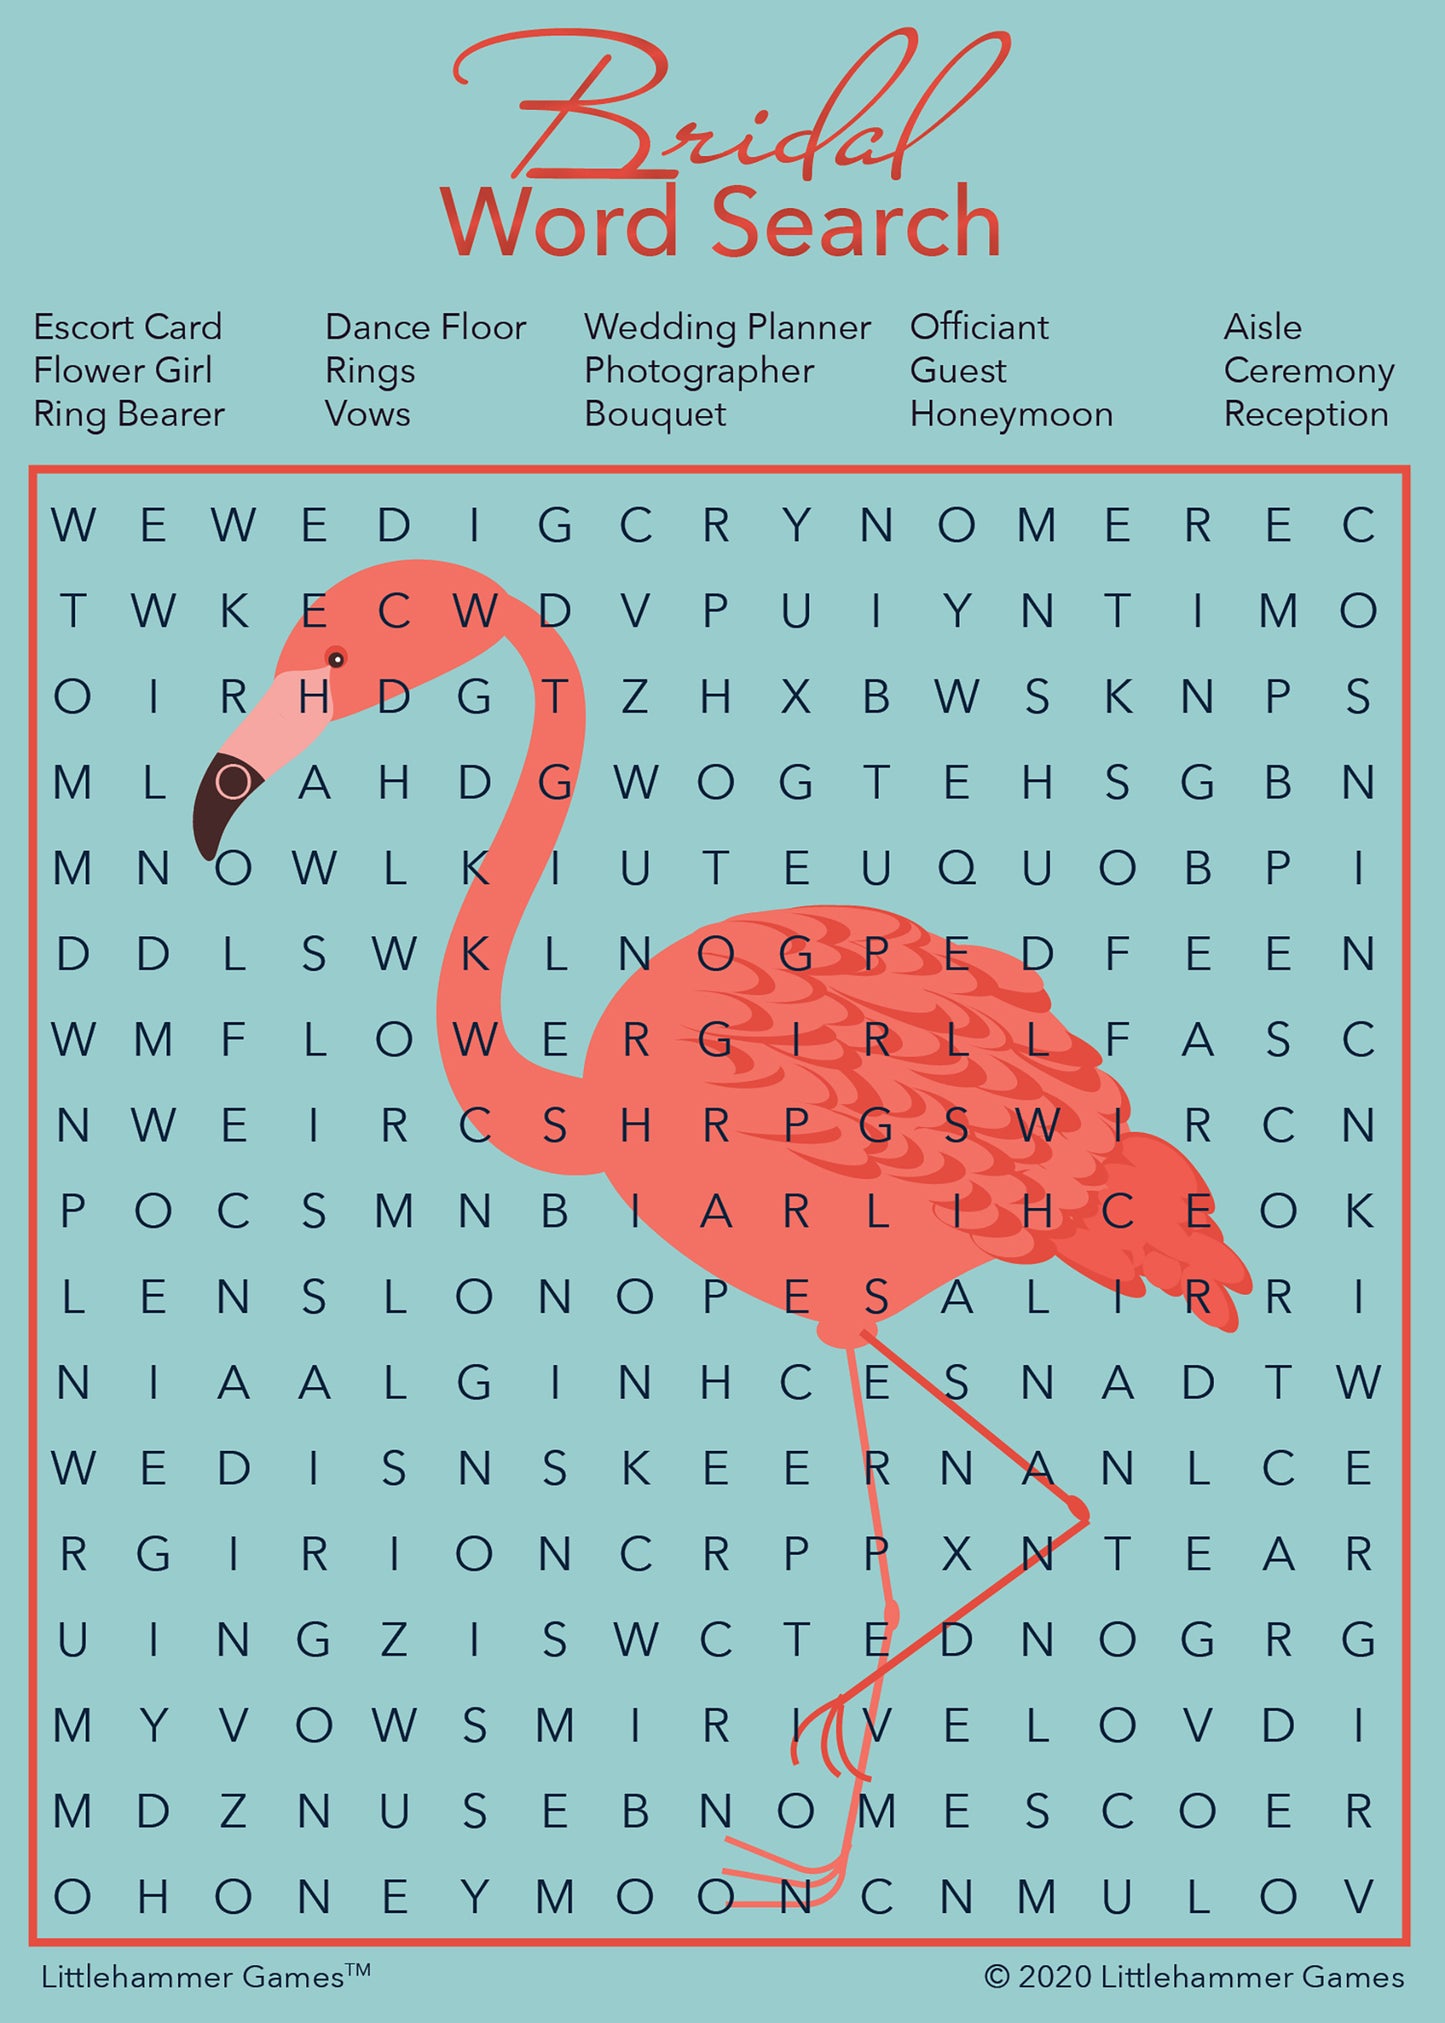 Bridal Word Search game card with a flamingo background